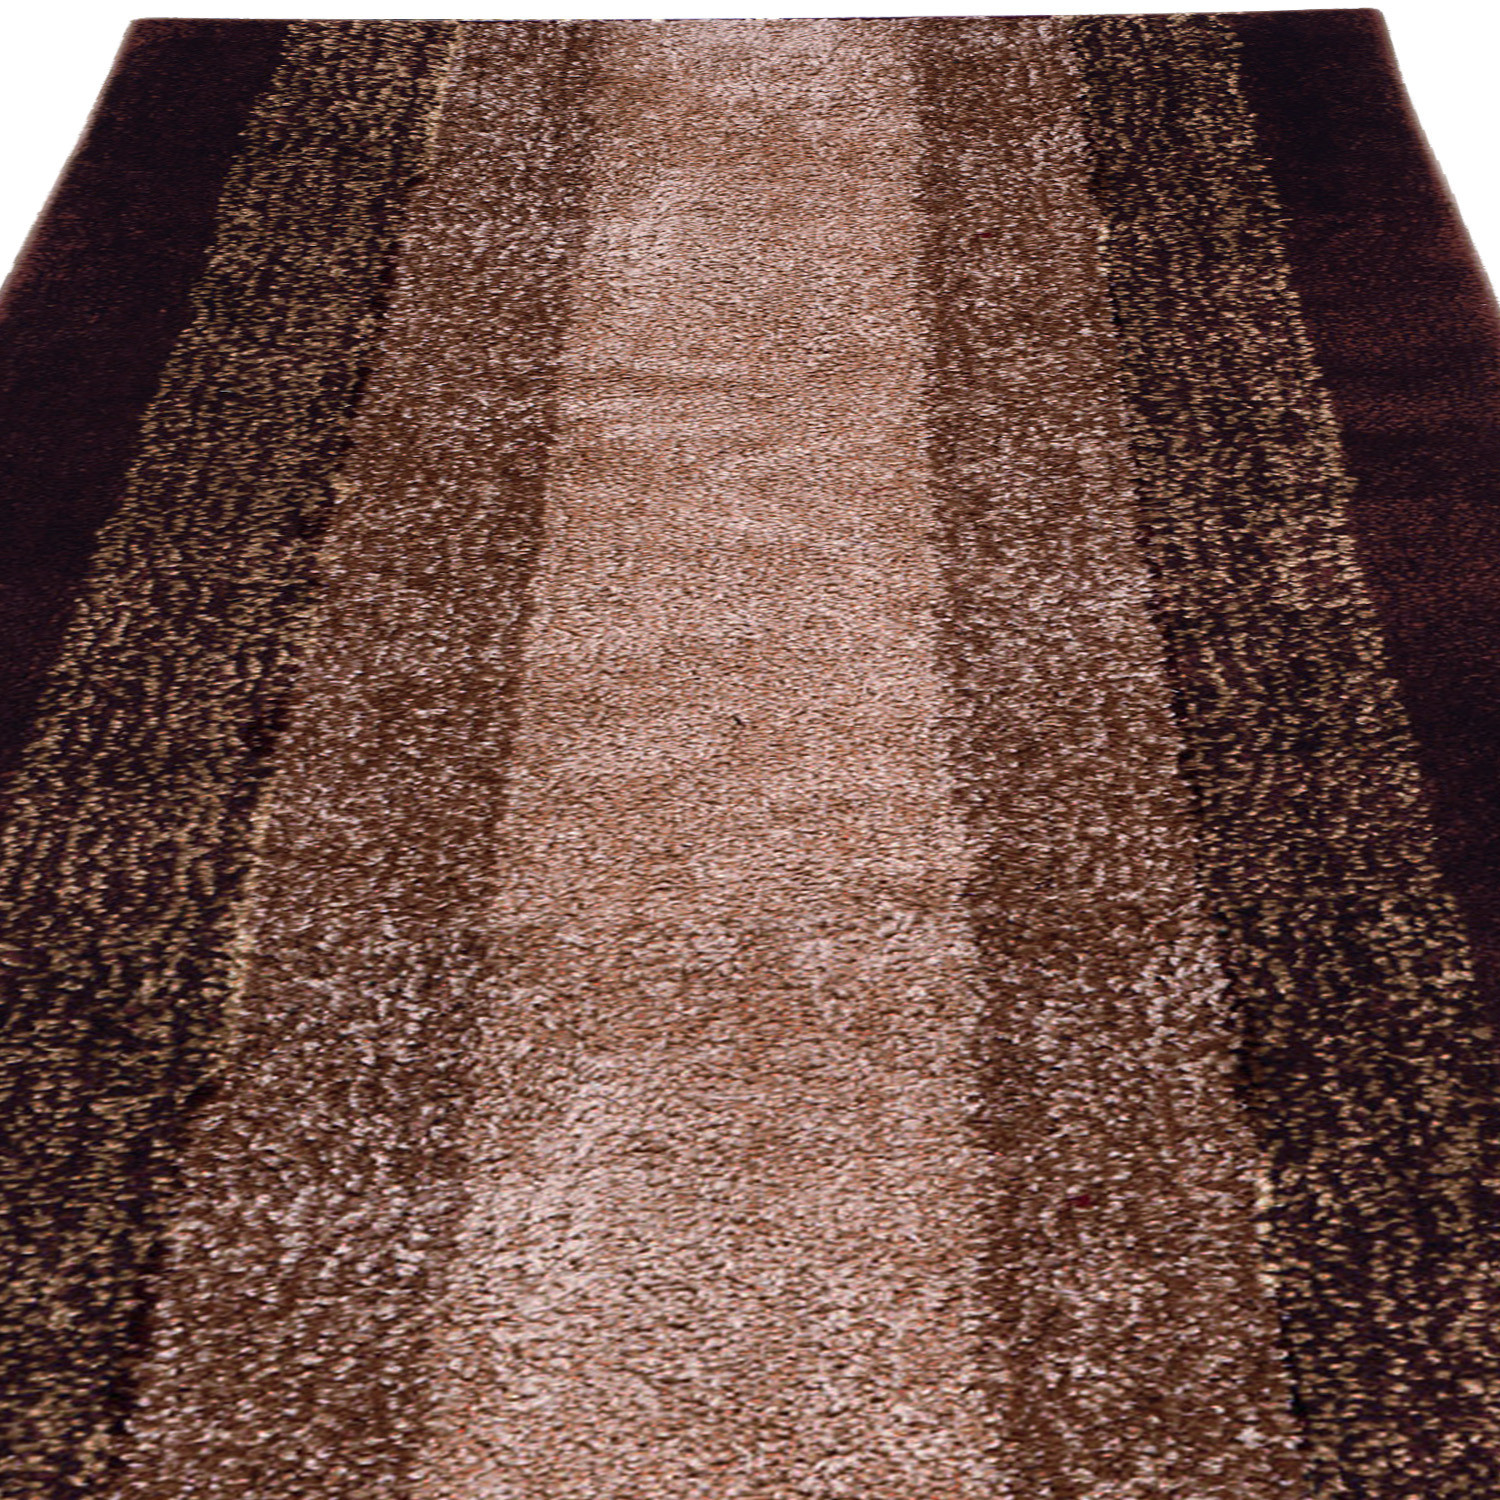 Kuber Industries Shaggy Carpet|Polyester Bedside Runner,Soft Rug For Hall,Offices,Kitchens,Bedroom,Floor Home Décor,5 x 2 Ft.(Brown)